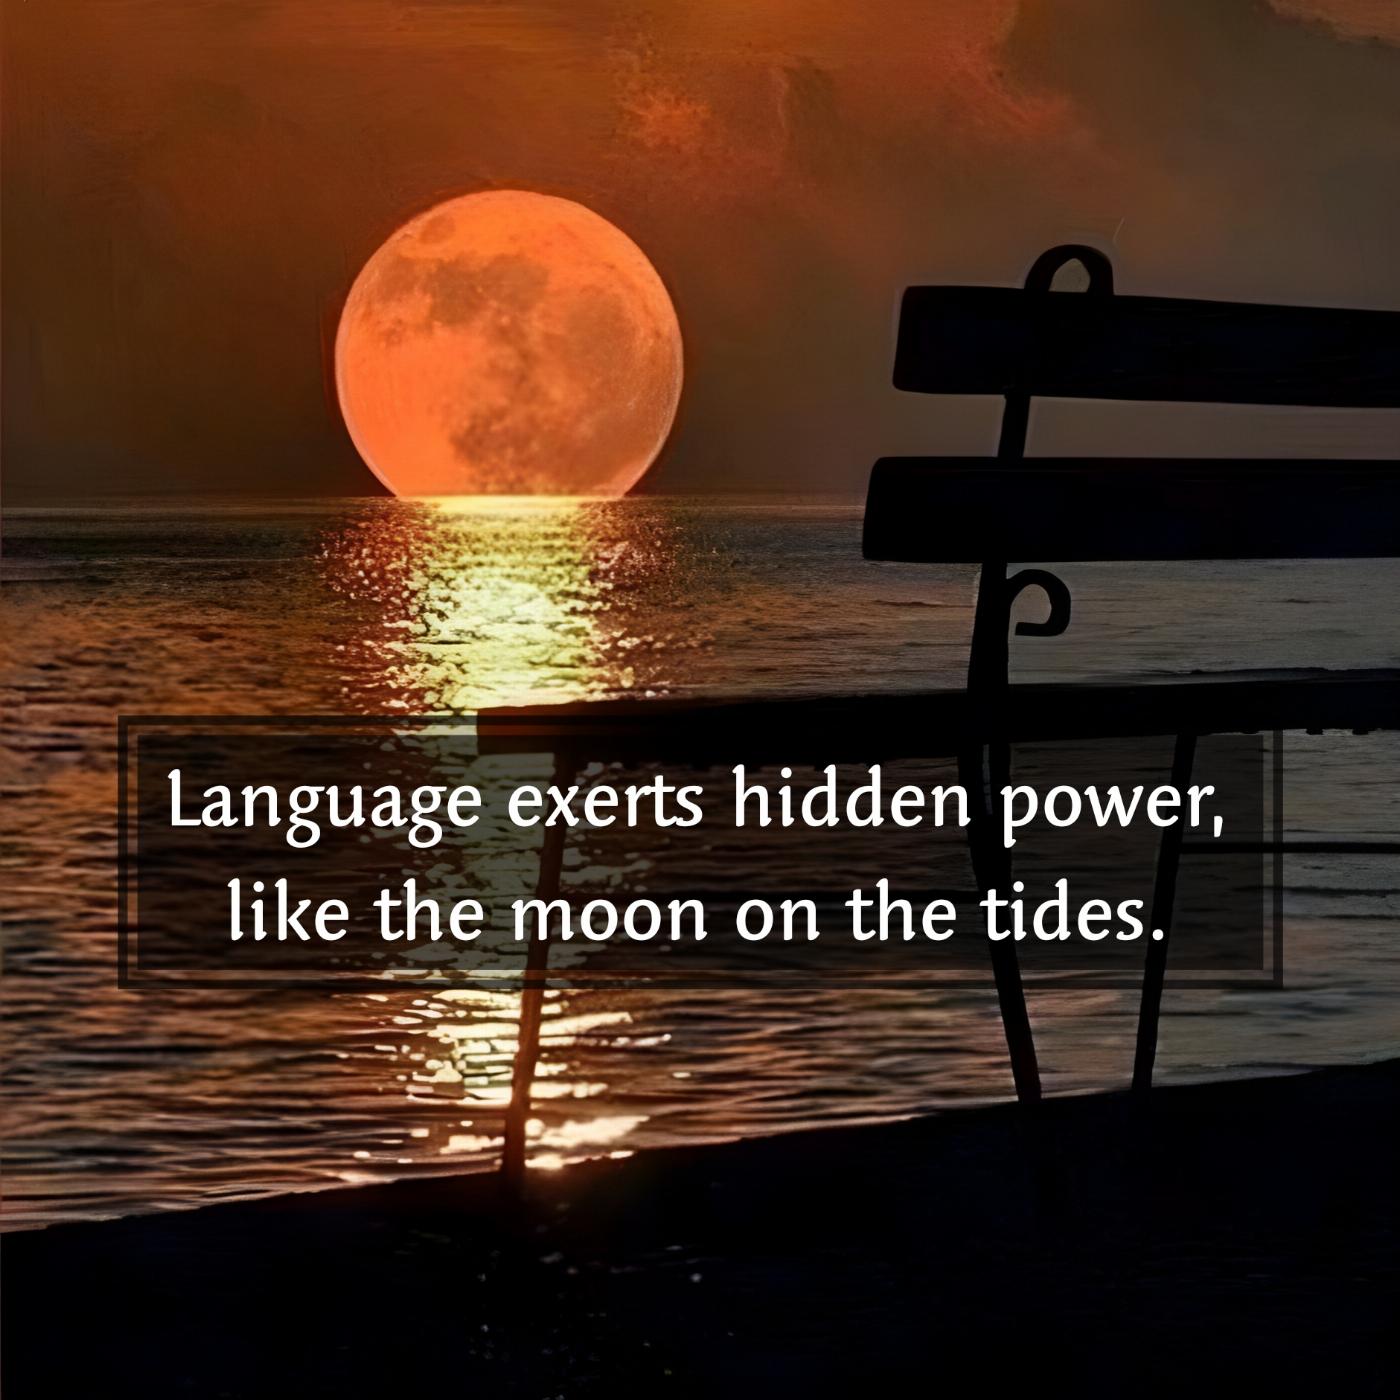 Language exerts hidden power like the moon on the tides